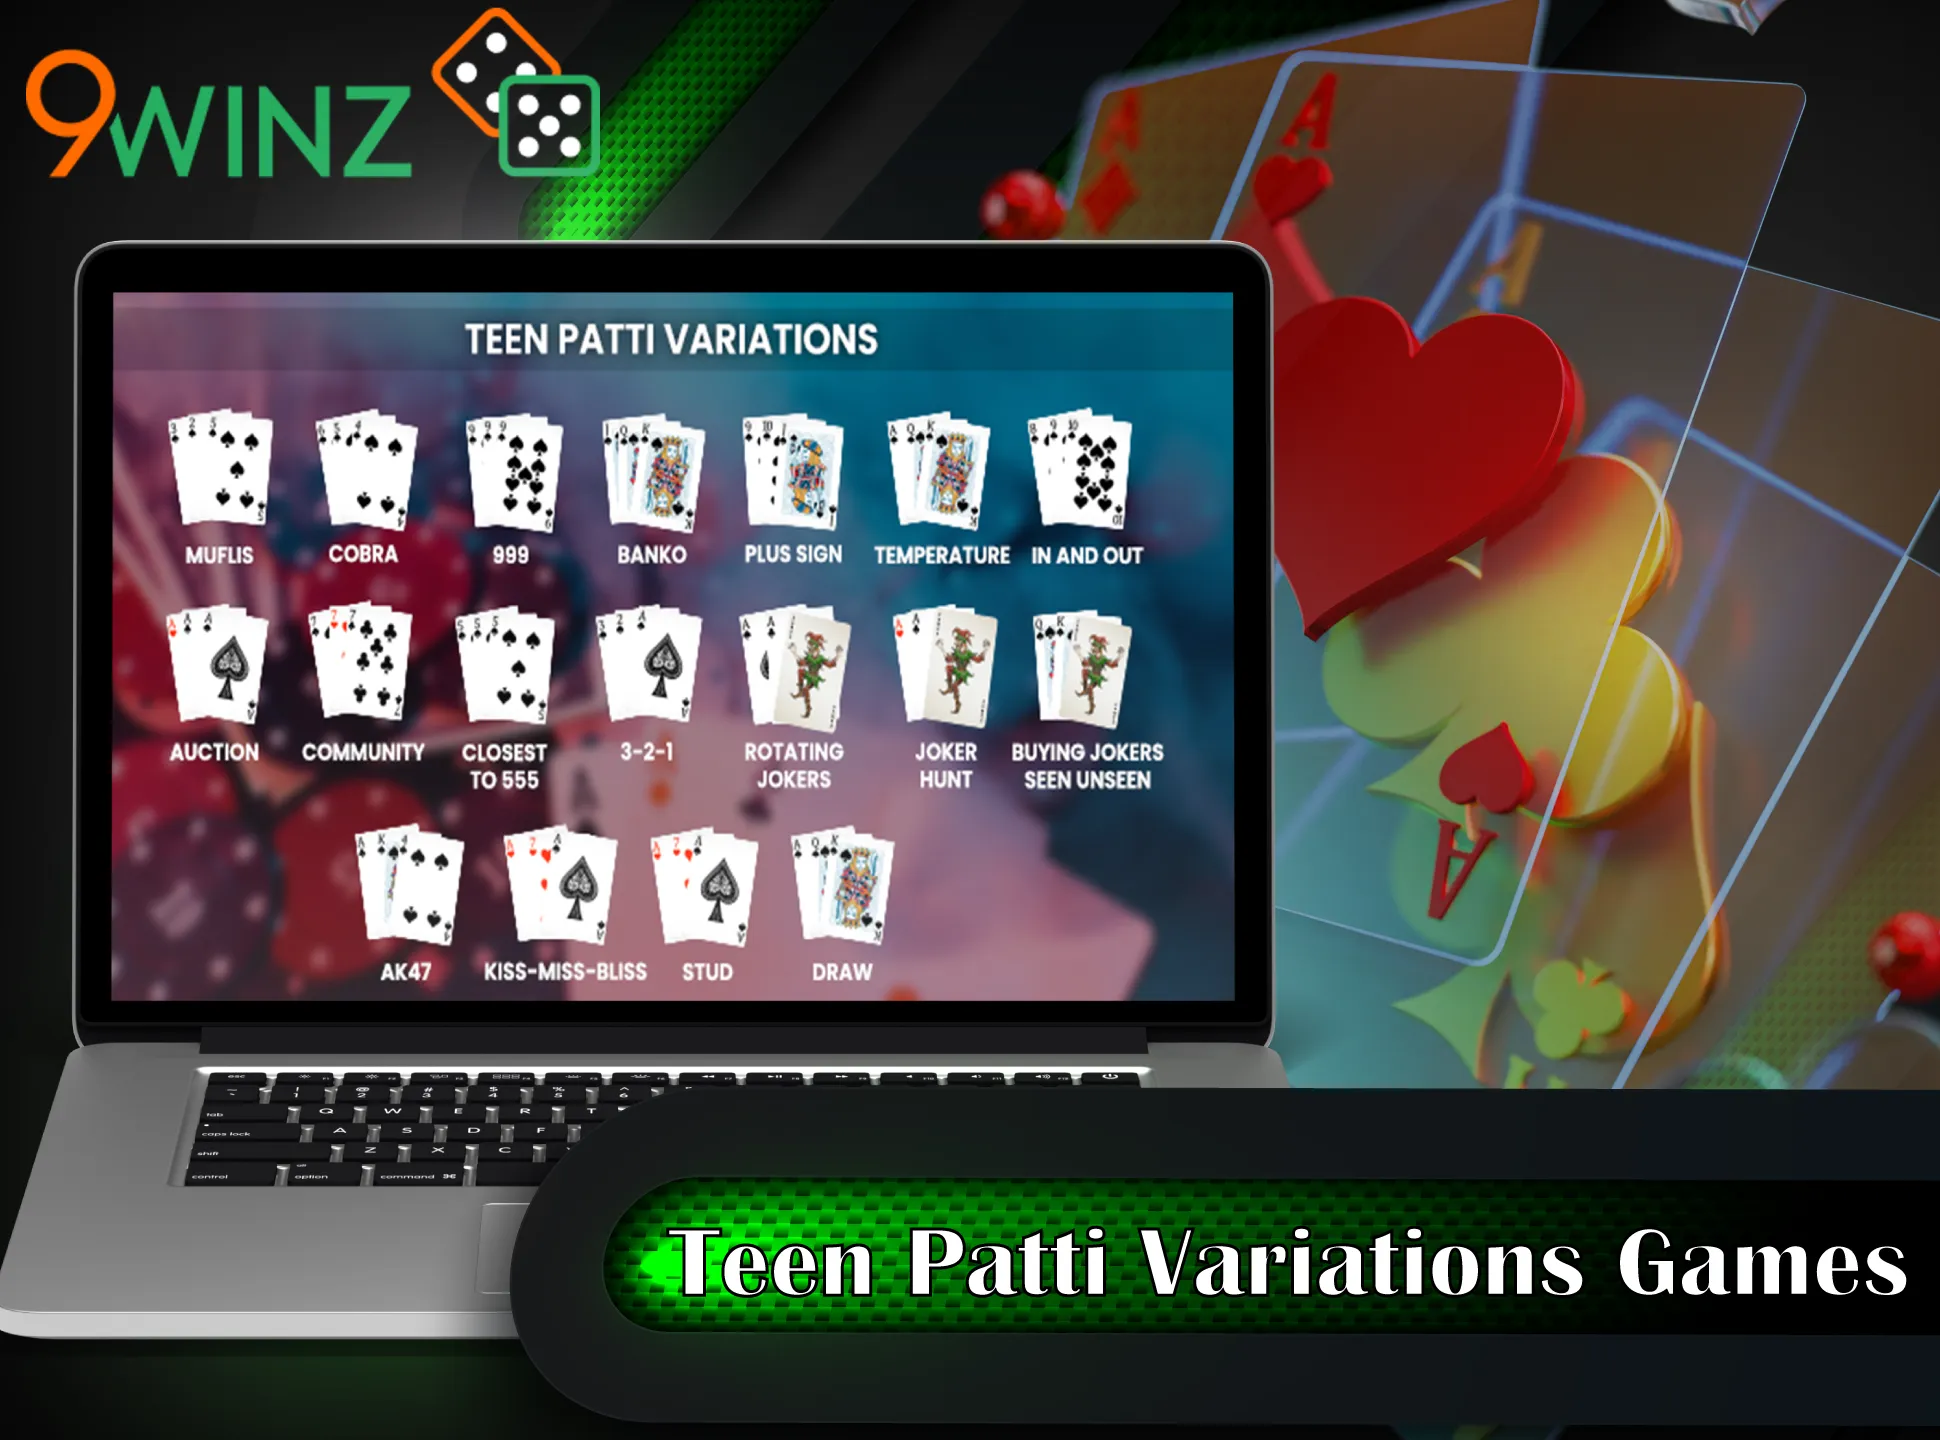 9winz has different varioations of the Teen Patti game.